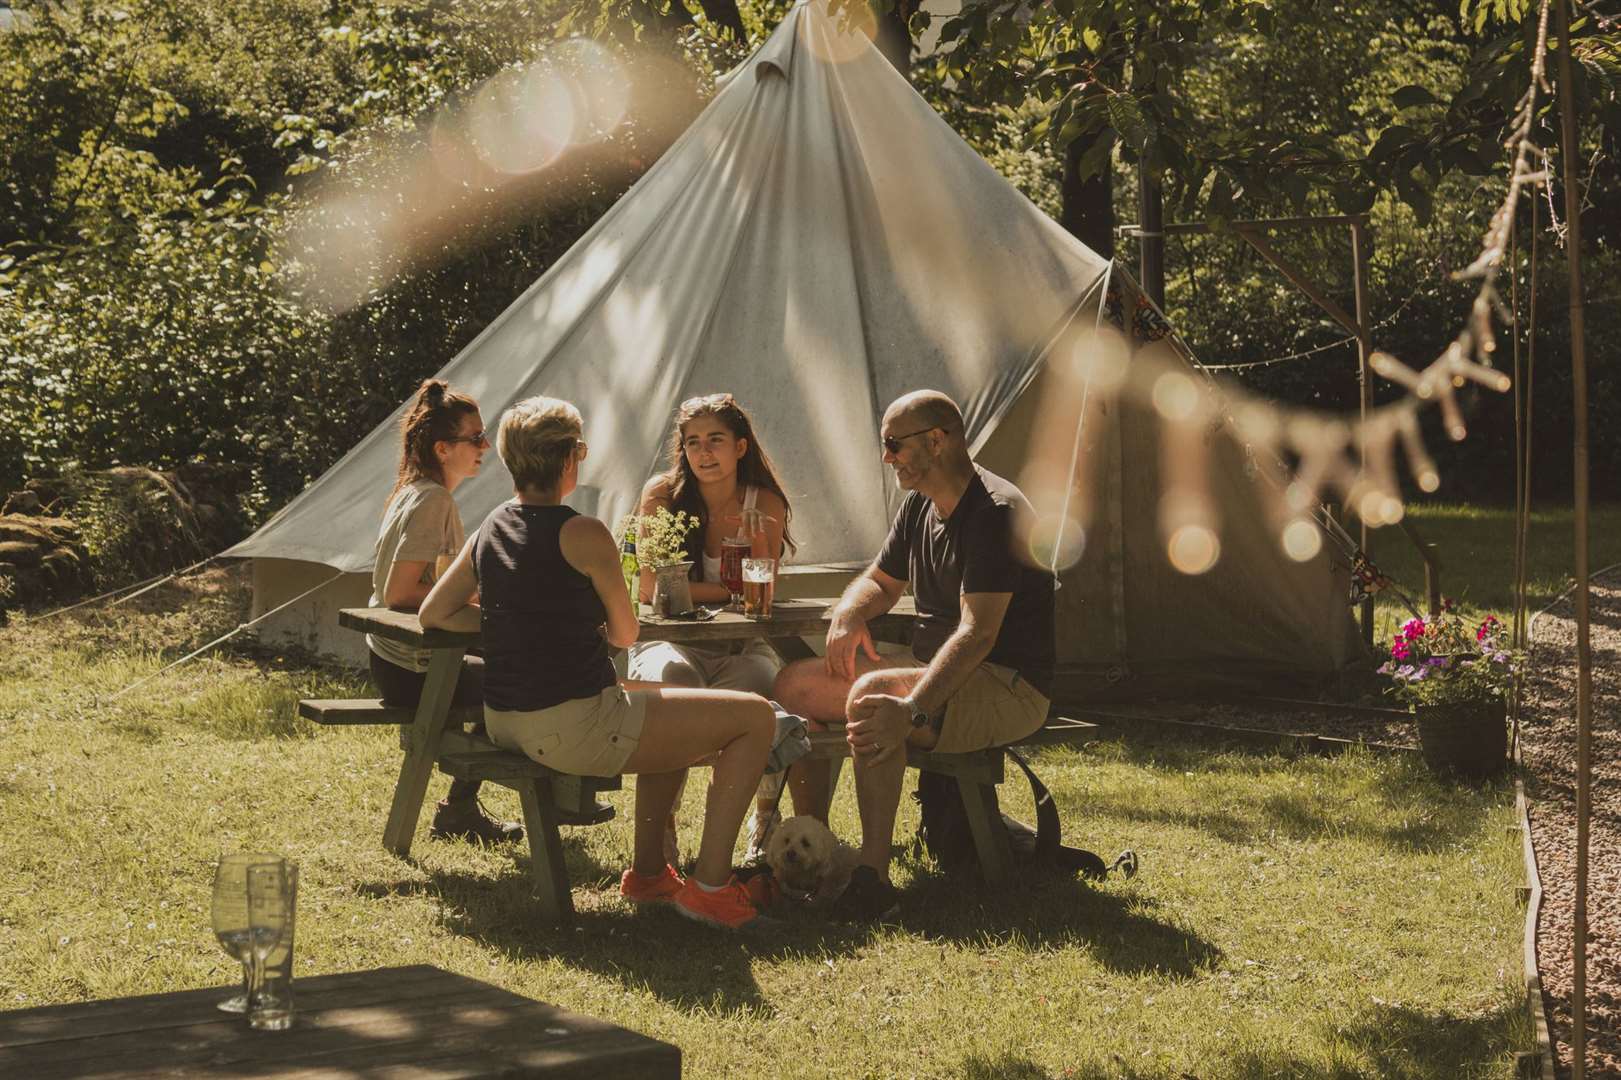 Are you thinking about camping this summer?